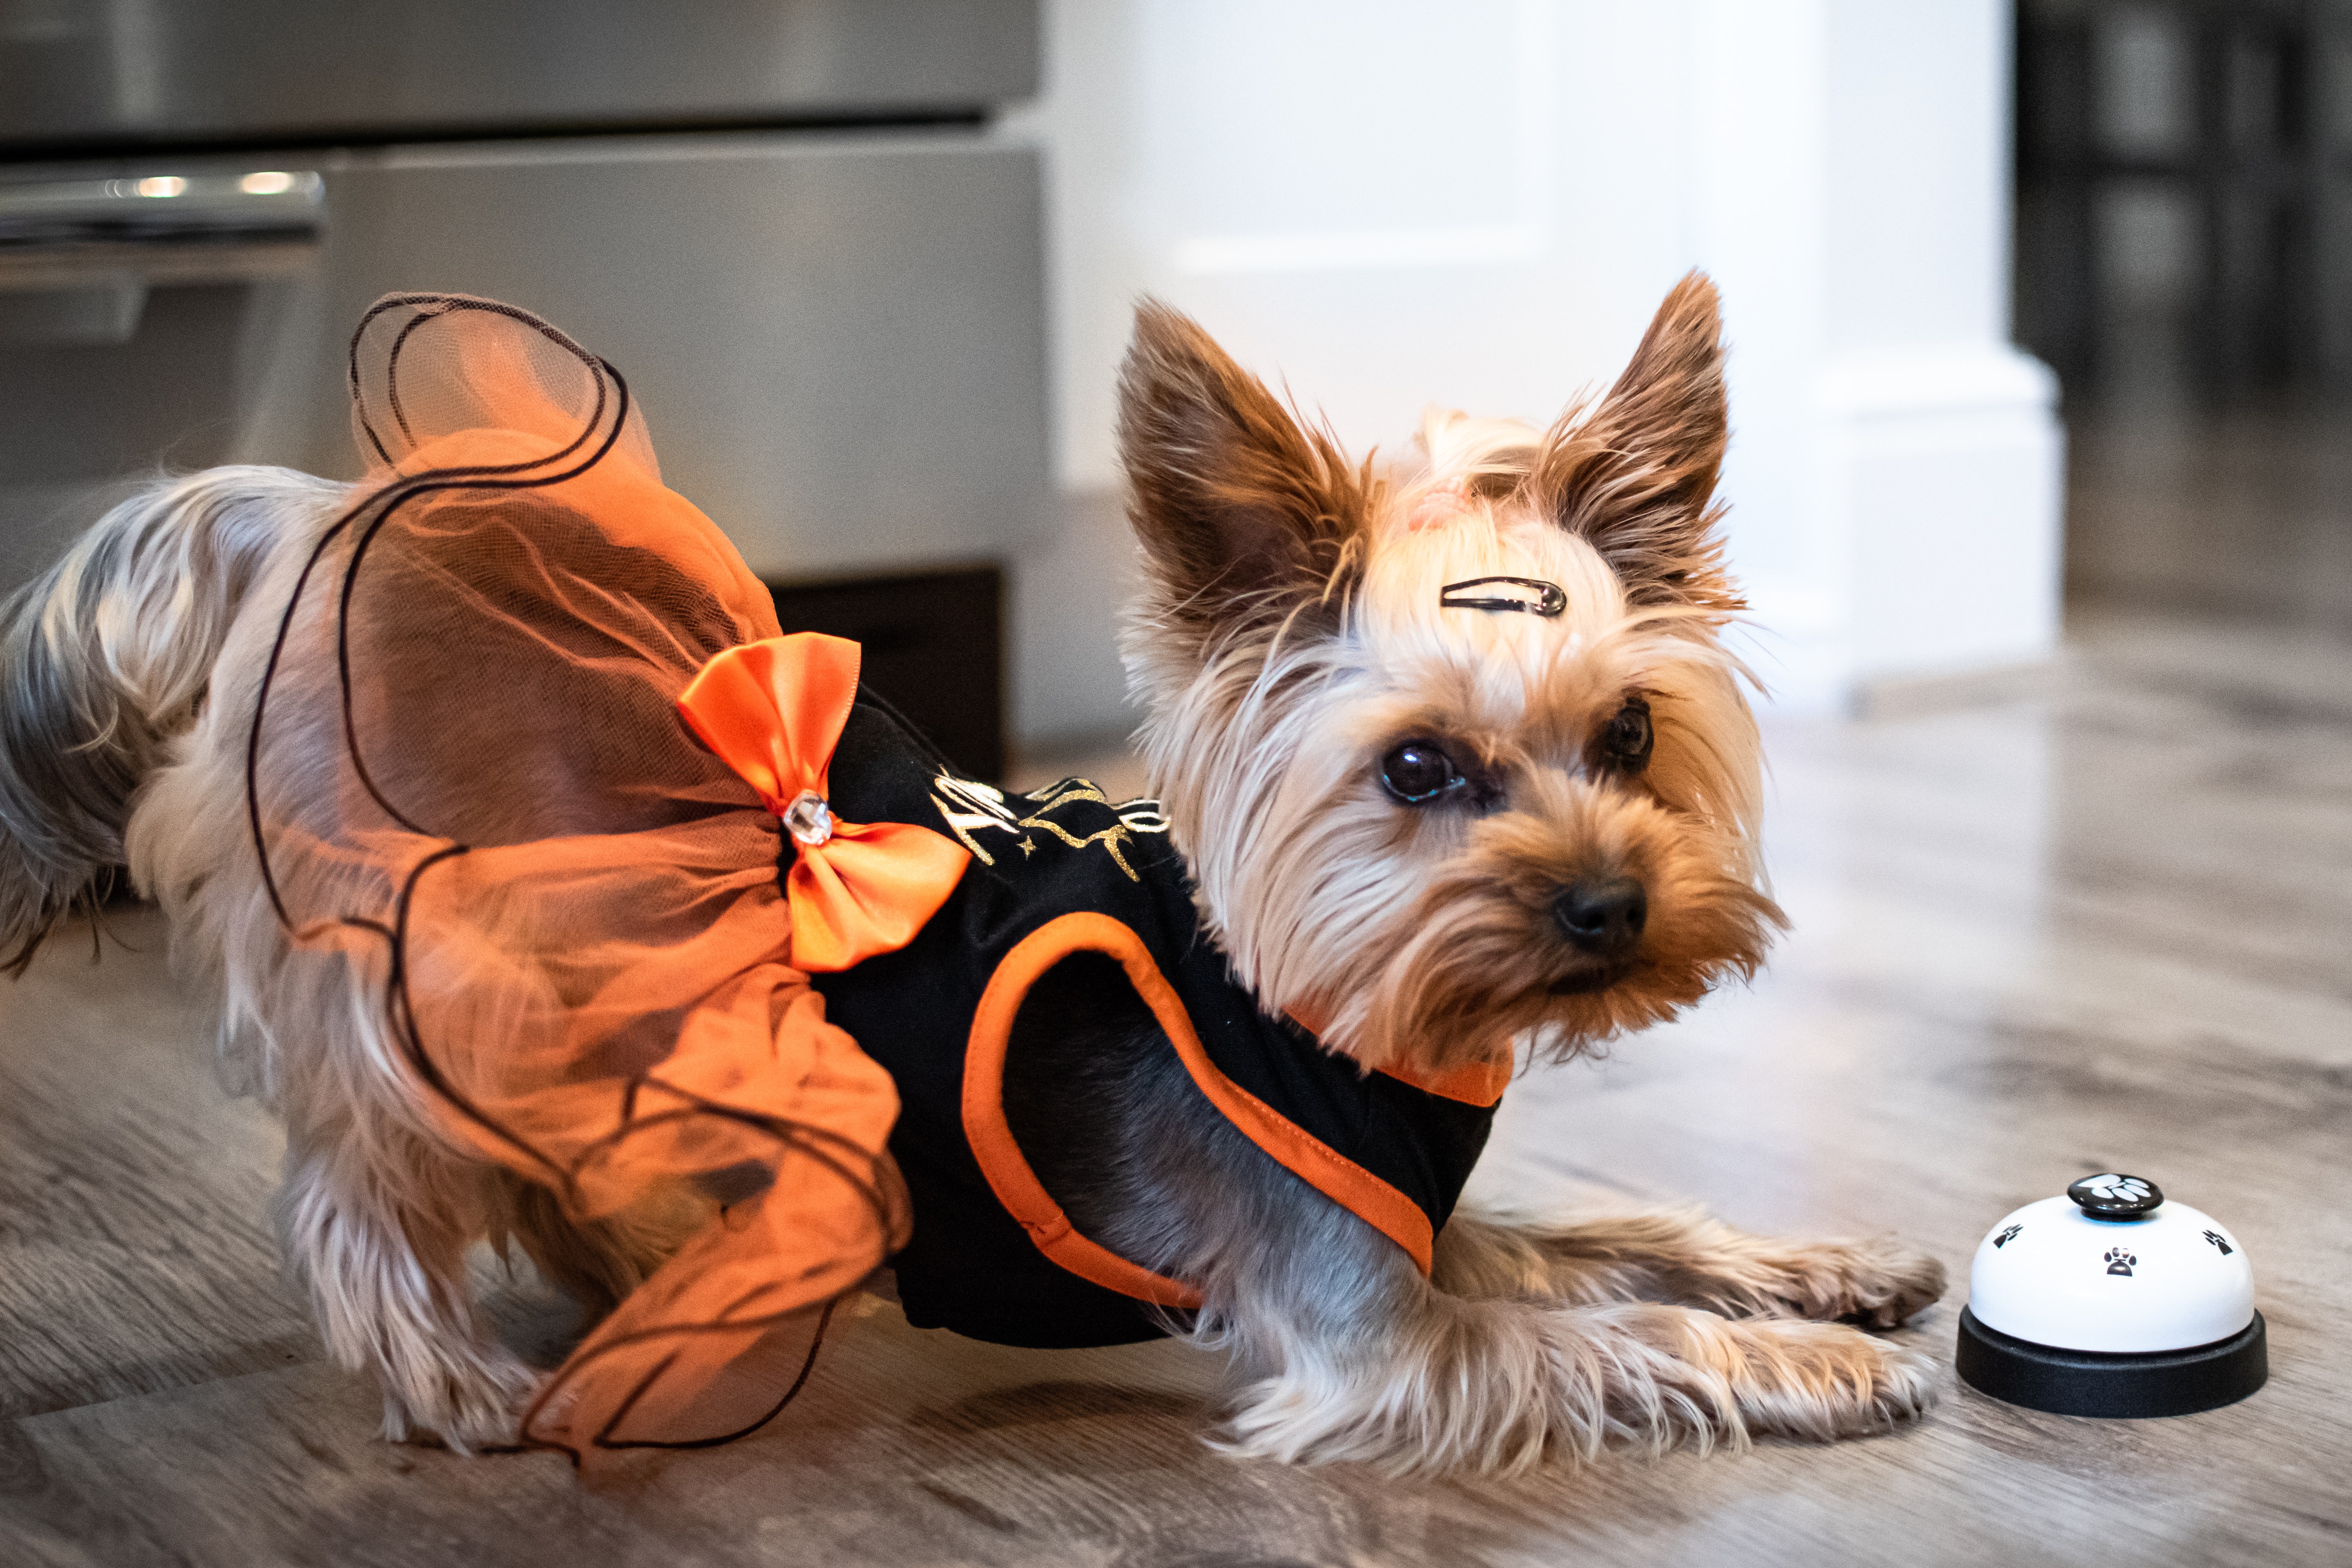 a female Yorkshire terrier dog wearing a cute dog outfit standing in front of a dog bell